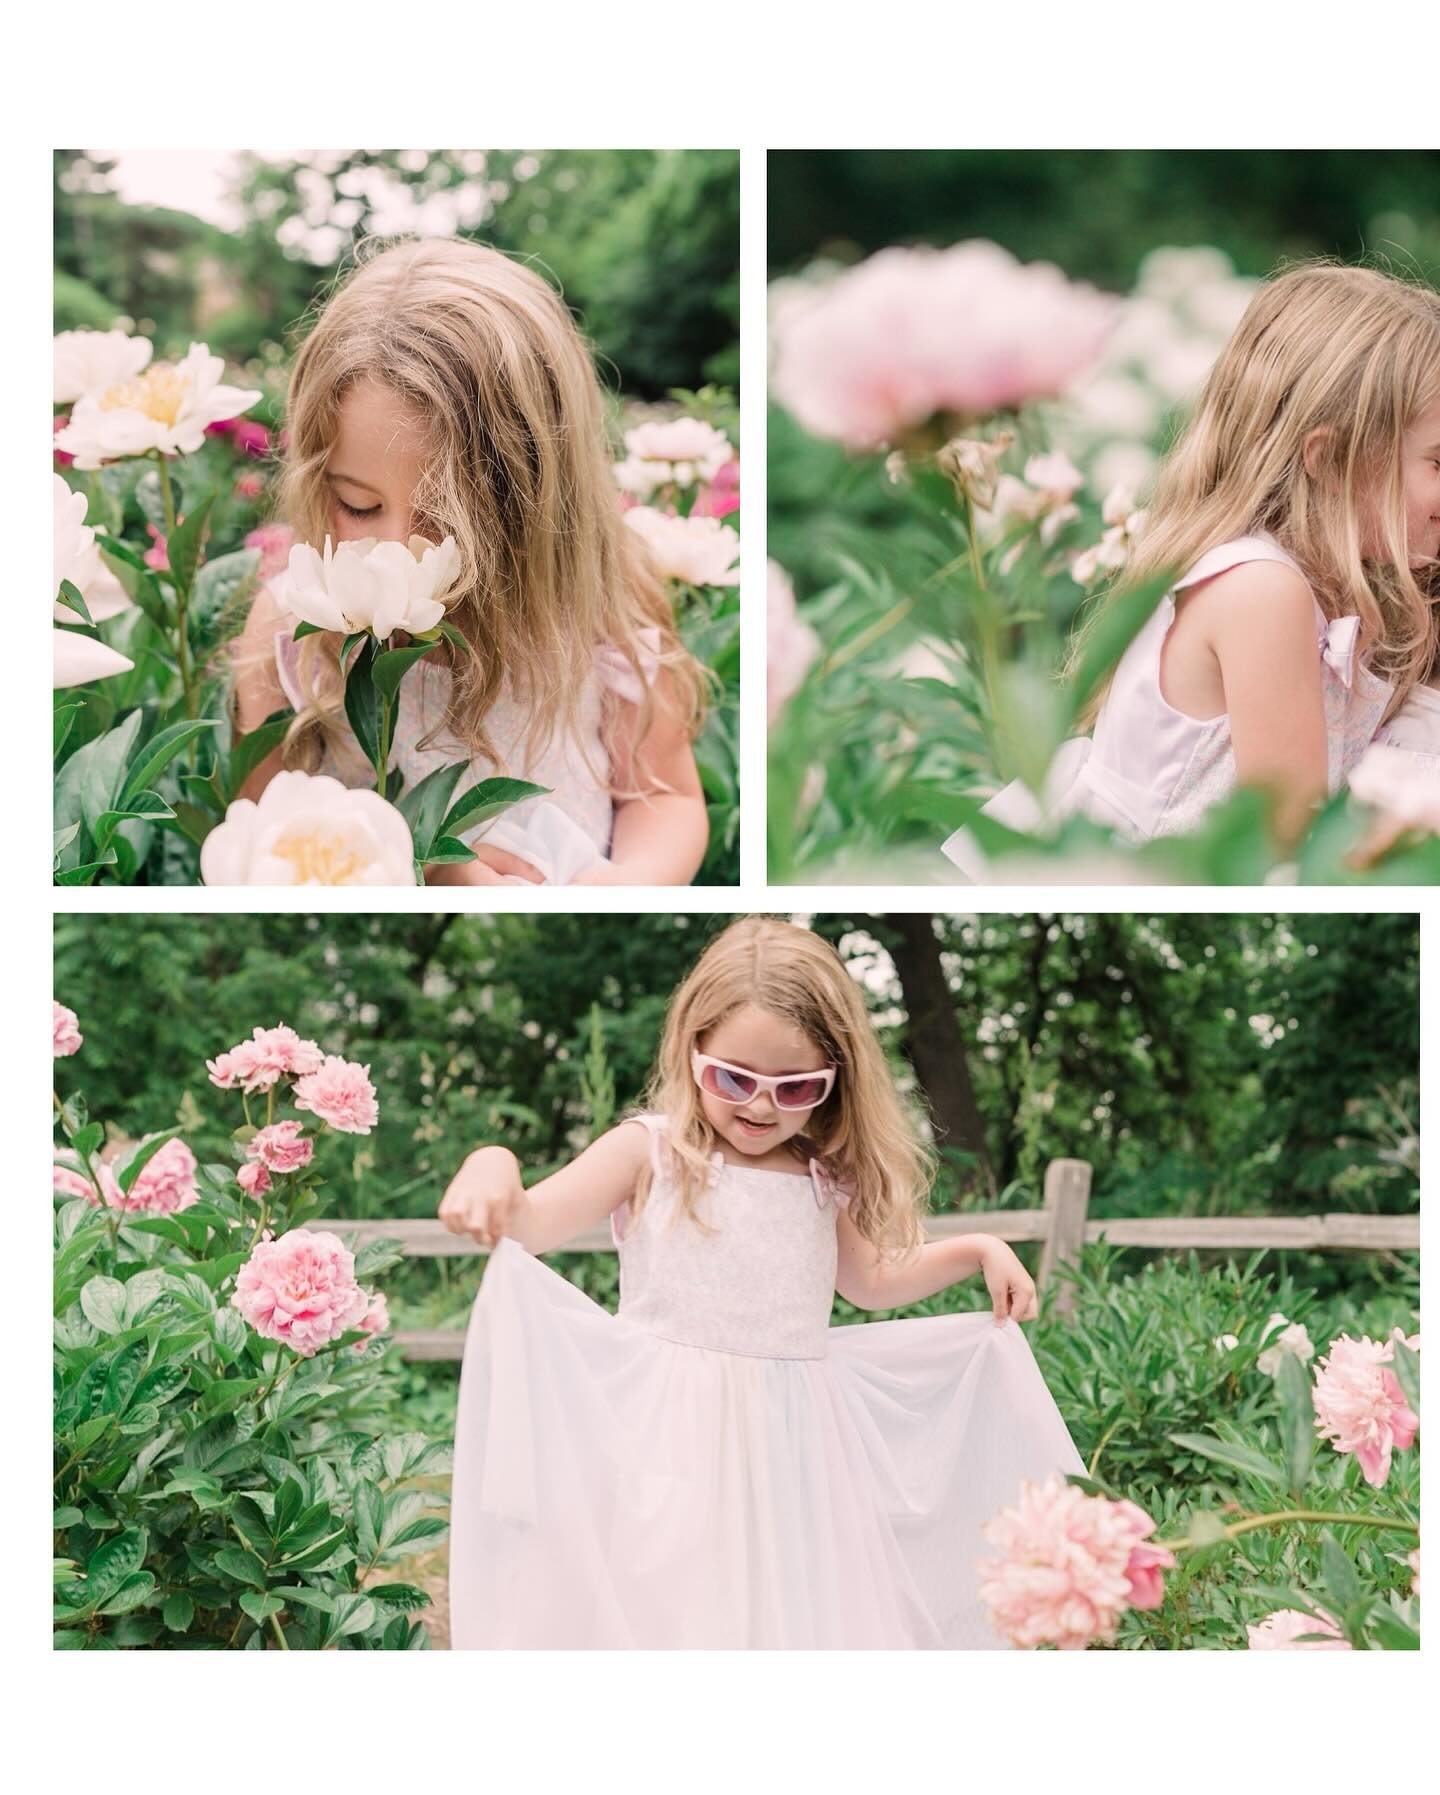 Just launched some new mini sessions including dates for the Peony Garden in Nichols Arboretum!! Mini sessions are $300 and includes a 20-minute session, 15-20 edited digital files with a print release delivered in an online gallery with instant down